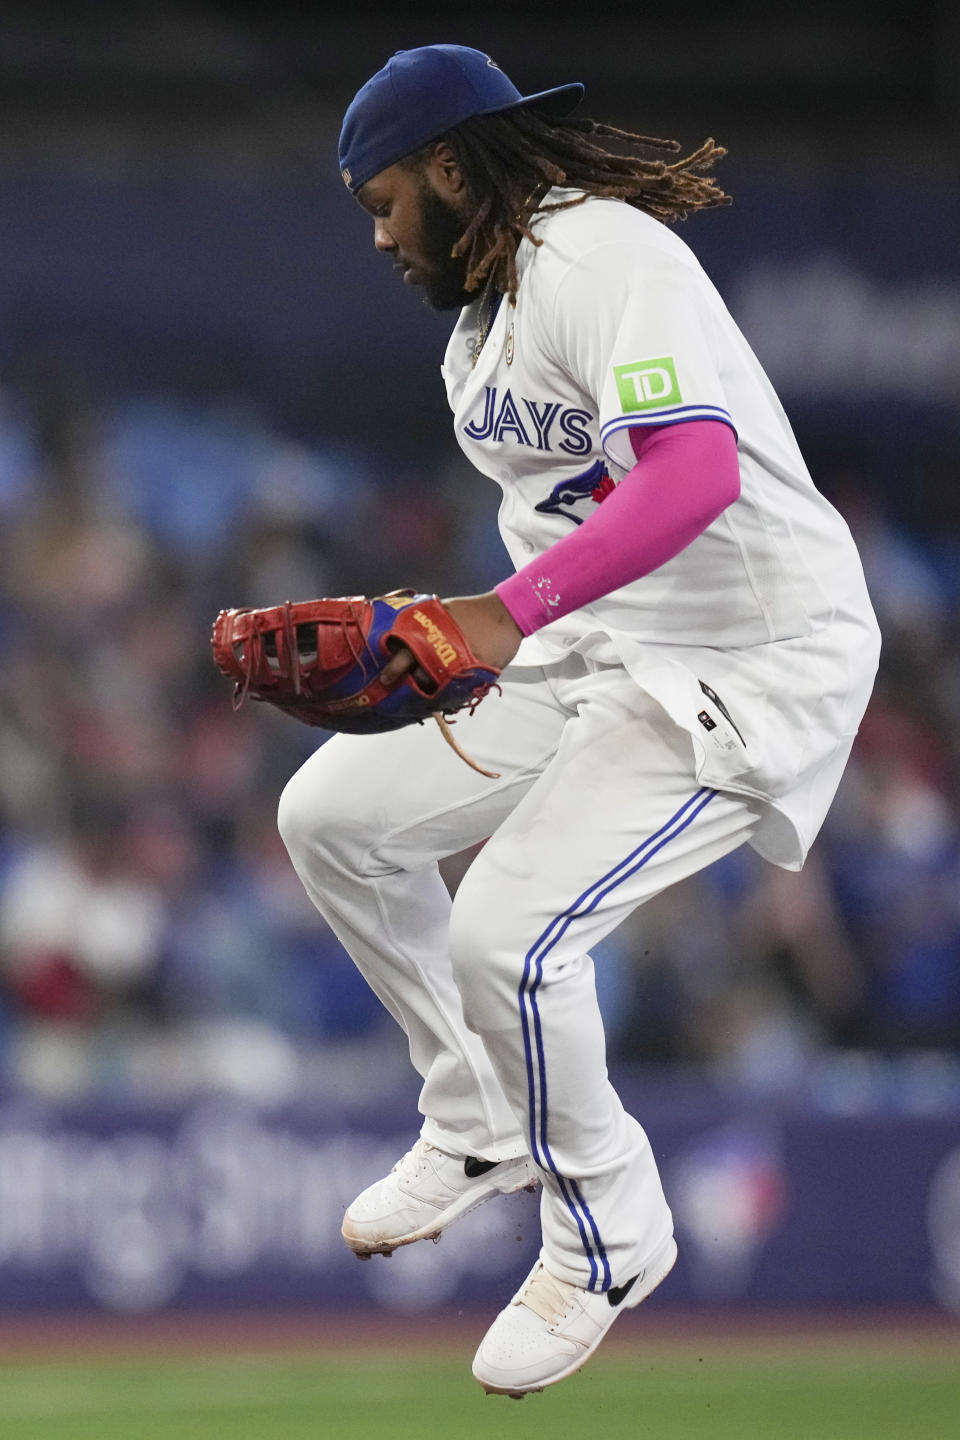 Toronto Blue Jays' Vladimir Guerrero Jr. celebrates after defeating the Boston Red Sox in a baseball game in Toronto, Friday, Sept. 15, 2023. (Chris Young/The Canadian Press via AP)